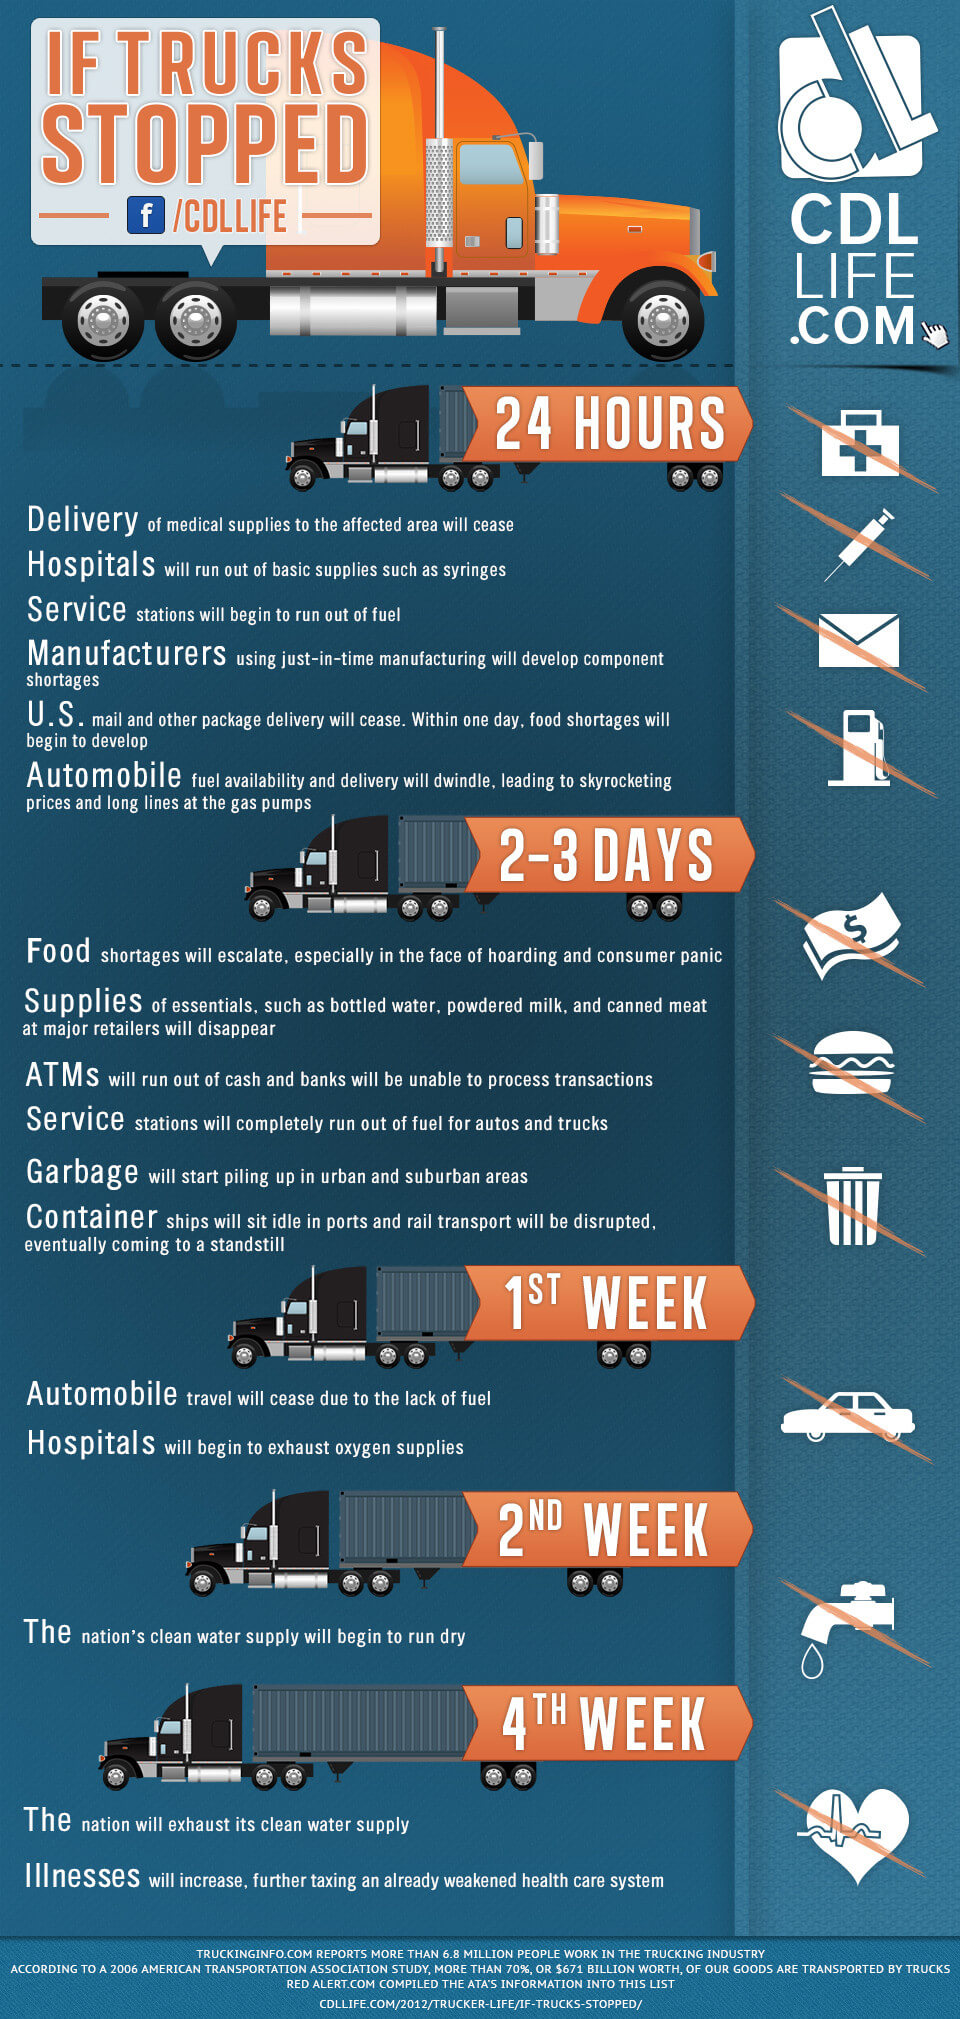 Daily Infographic: Truck driver essentials: Things truckers